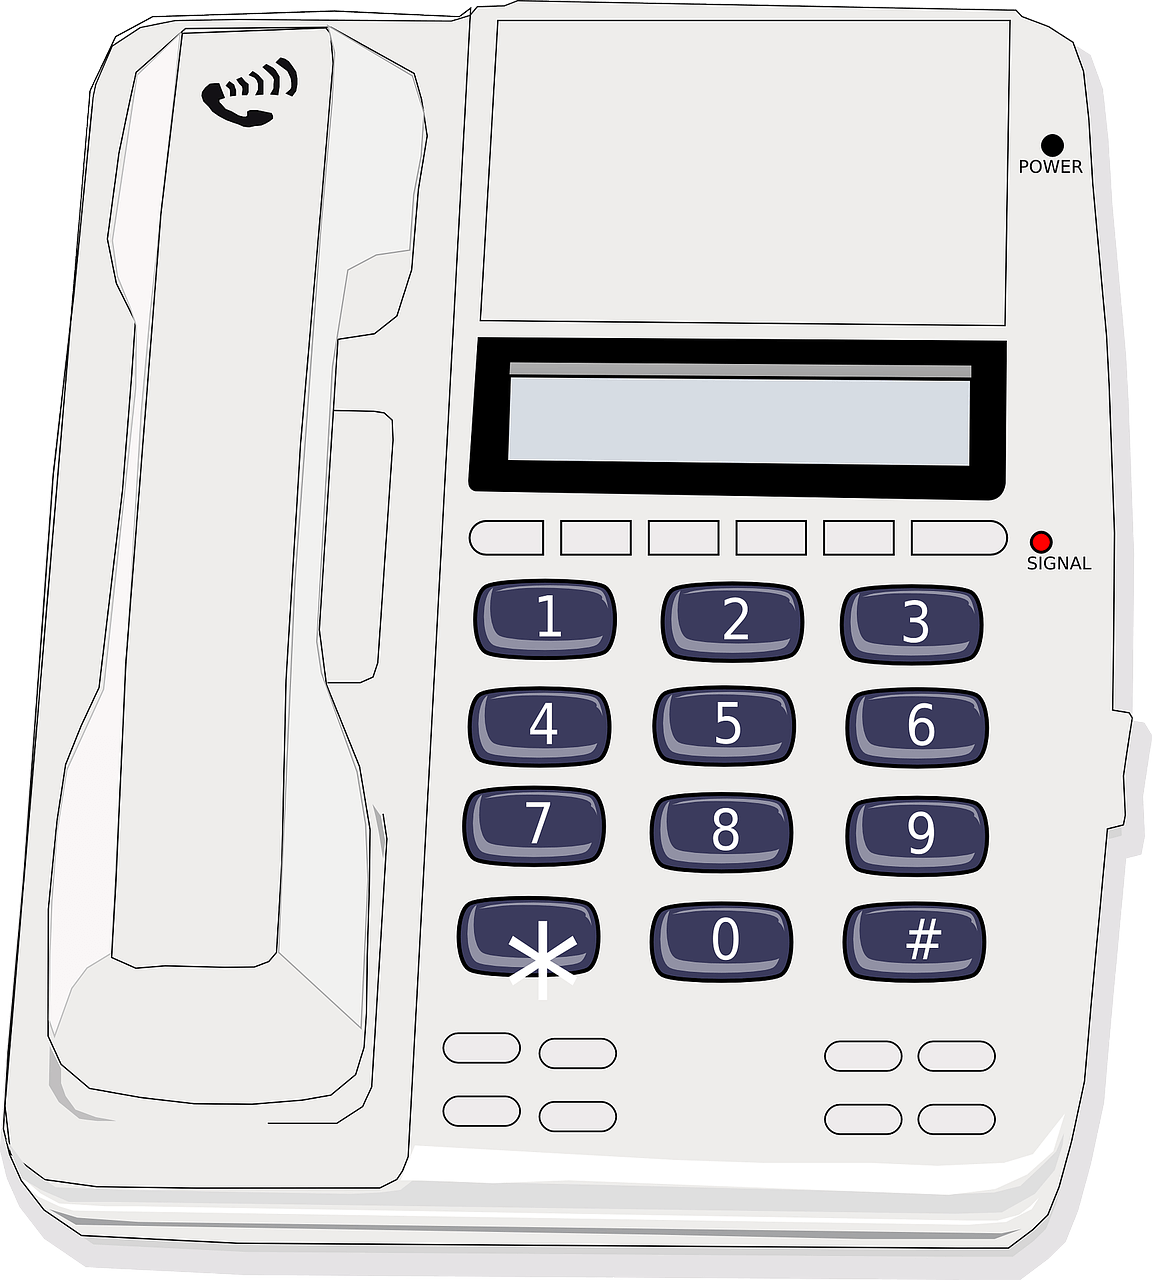 Wireframe graphic of a desktop business telephone